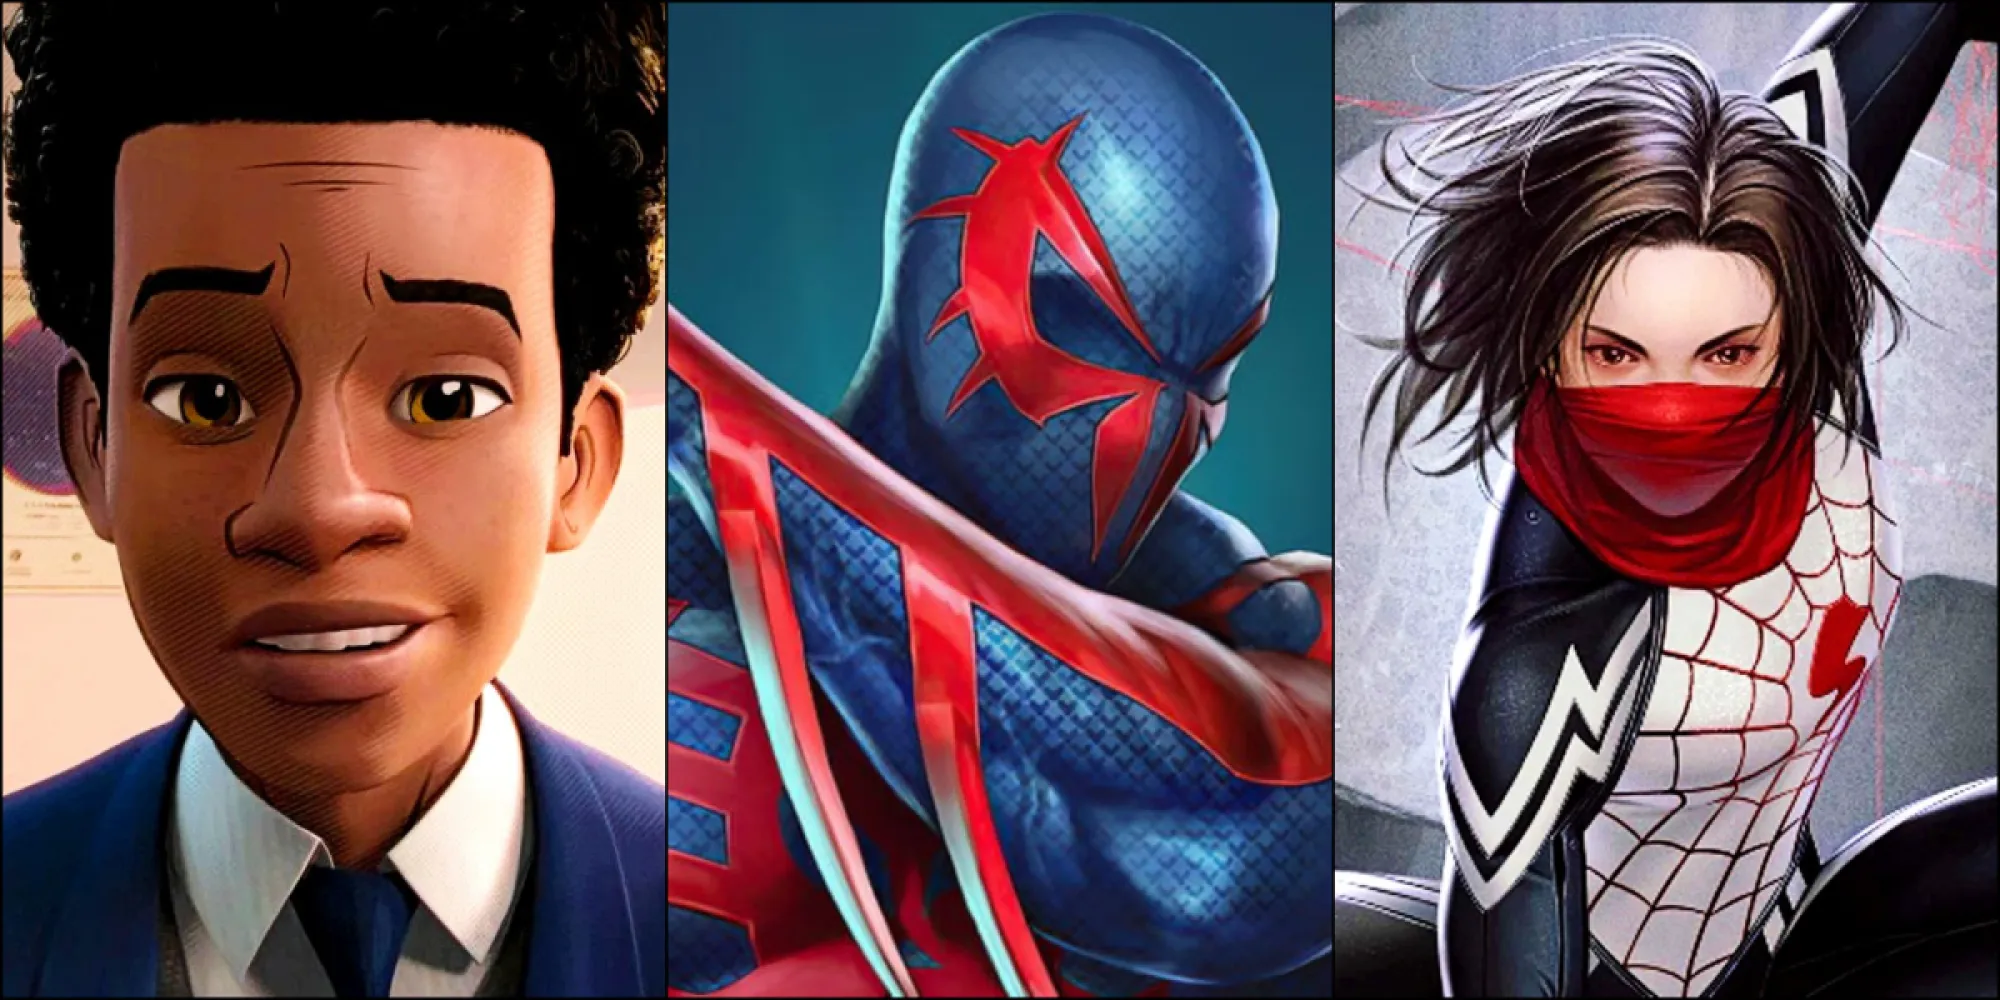 Miles Morales, Miguel O'Hara, and Silk in Spider-Man: Into the Spider-Verse and Marvel Comics